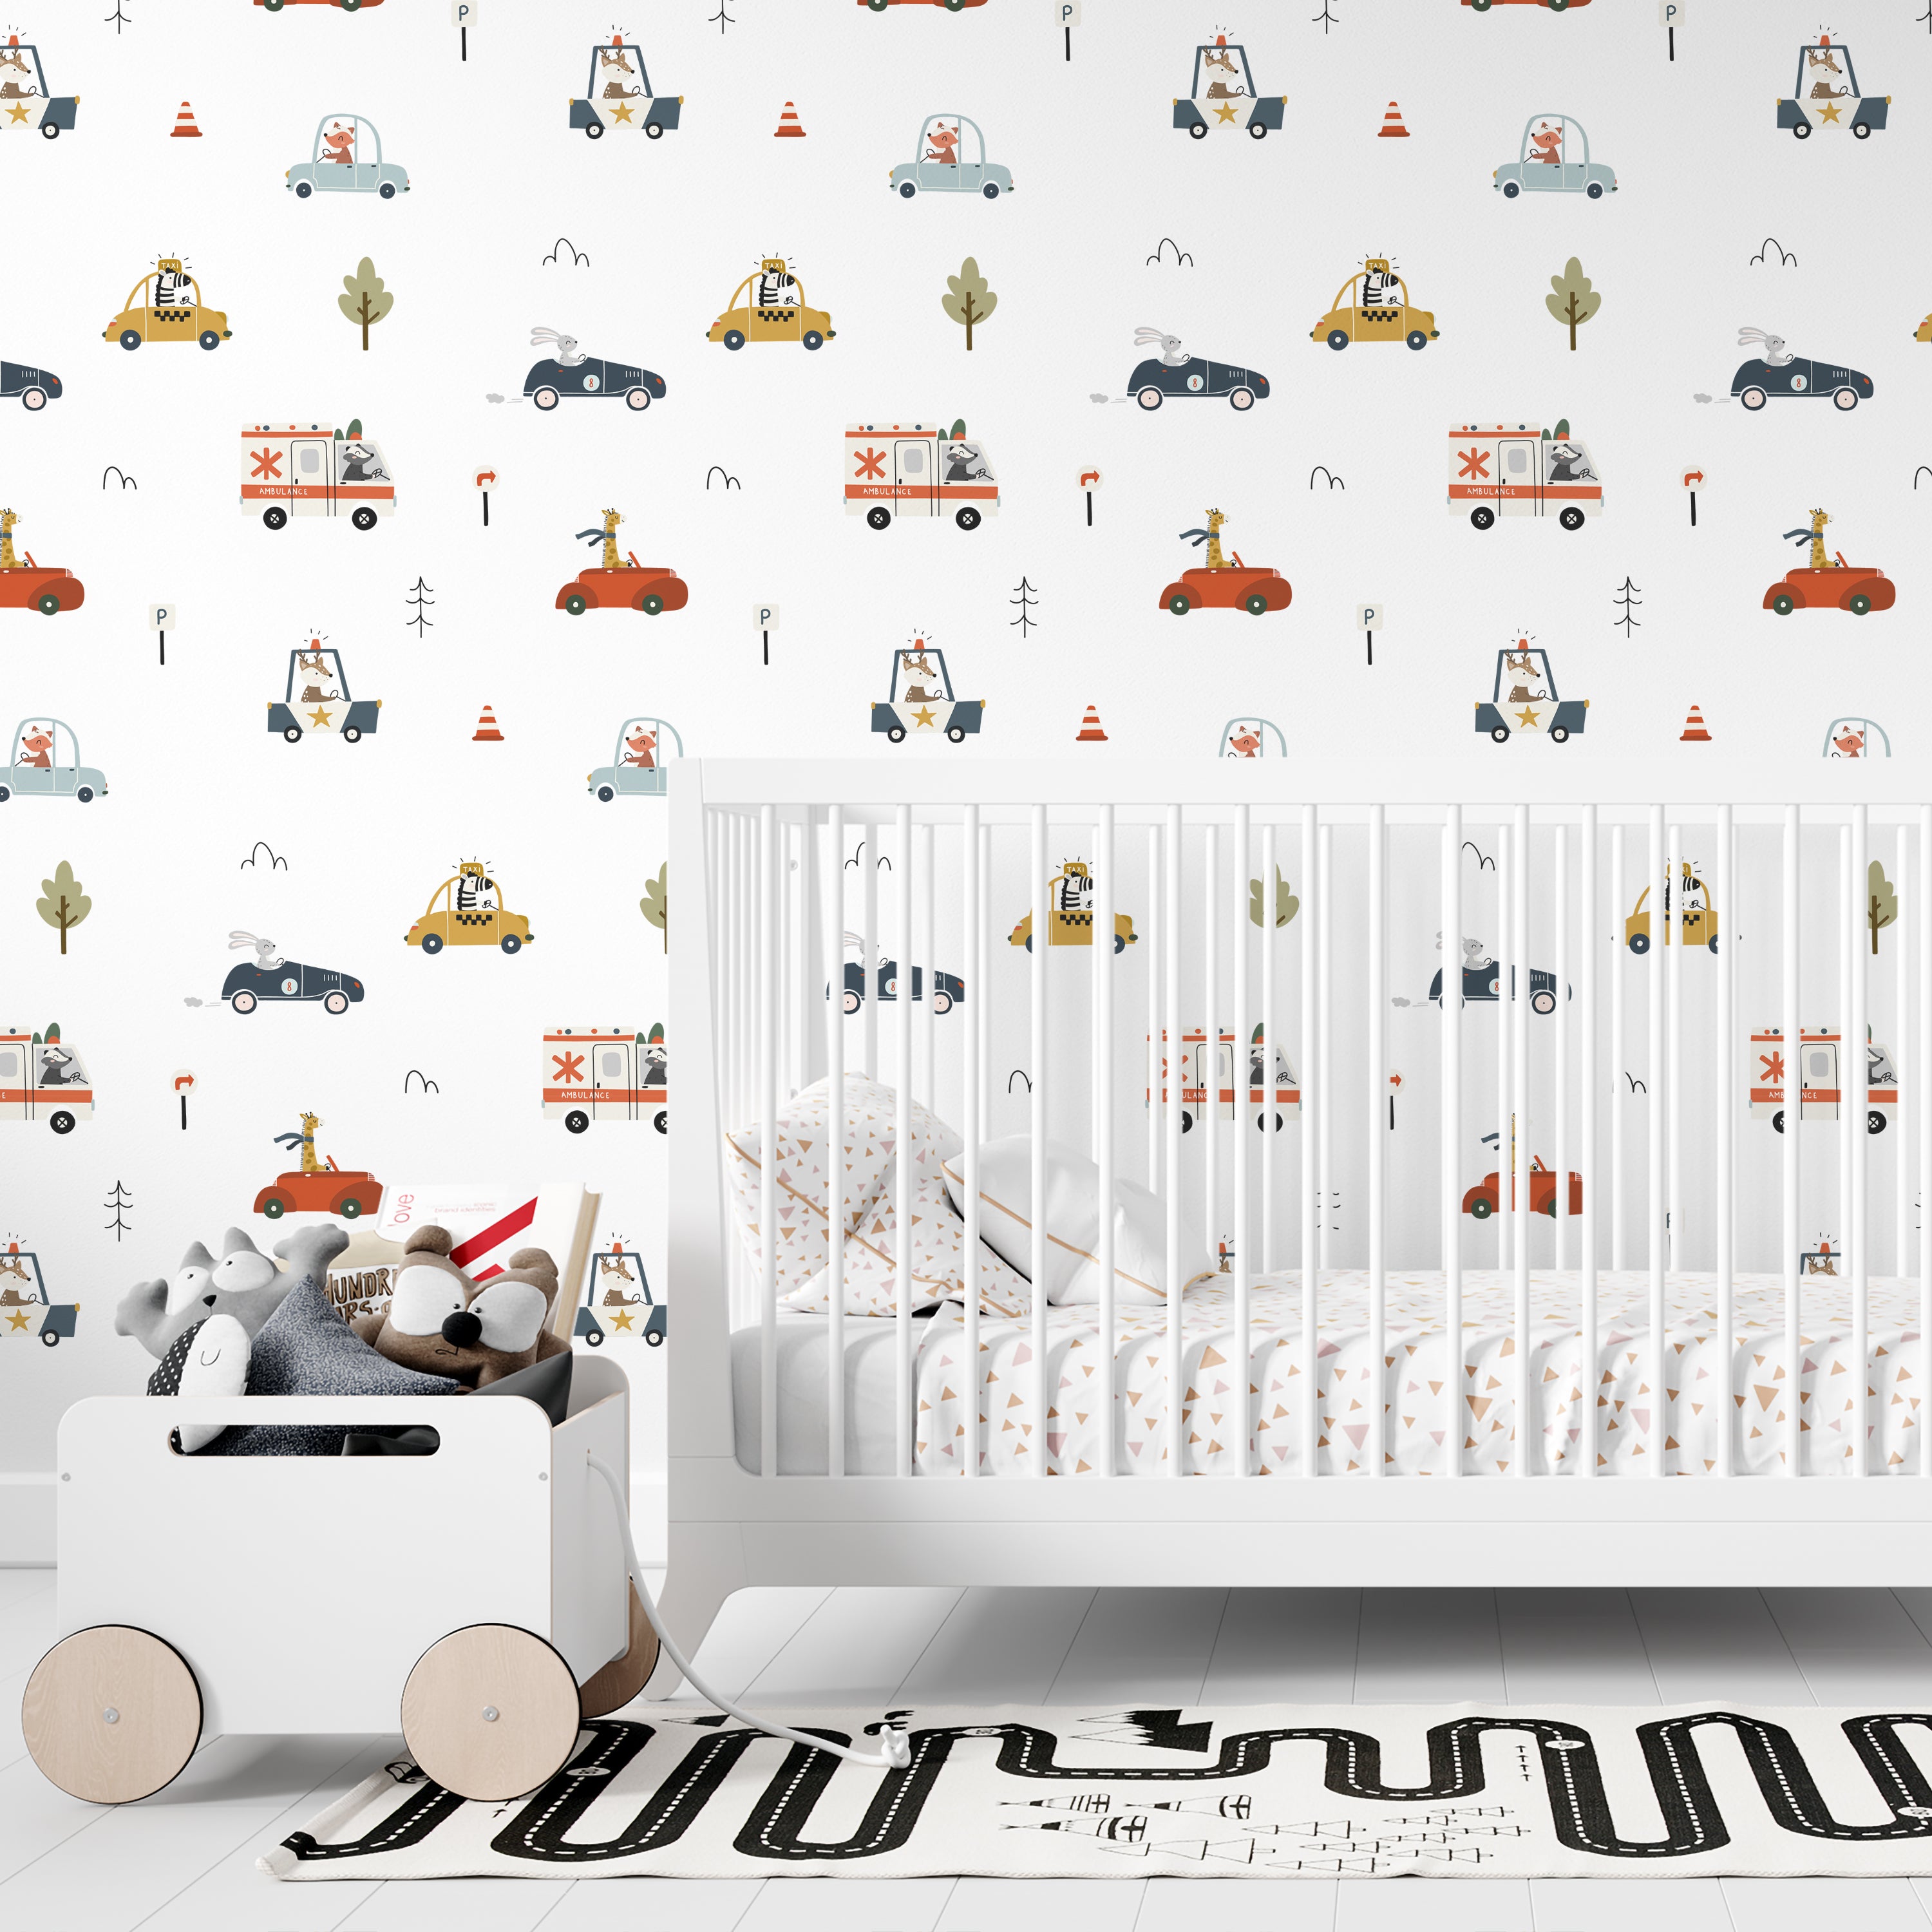 Nursery room decor highlighted by the Cute Cars Wallpaper 02 on the wall, showing playful scenes of cartoon cars driven by animals. The setting includes a white crib filled with plush toys, creating a cheerful and engaging atmosphere for children